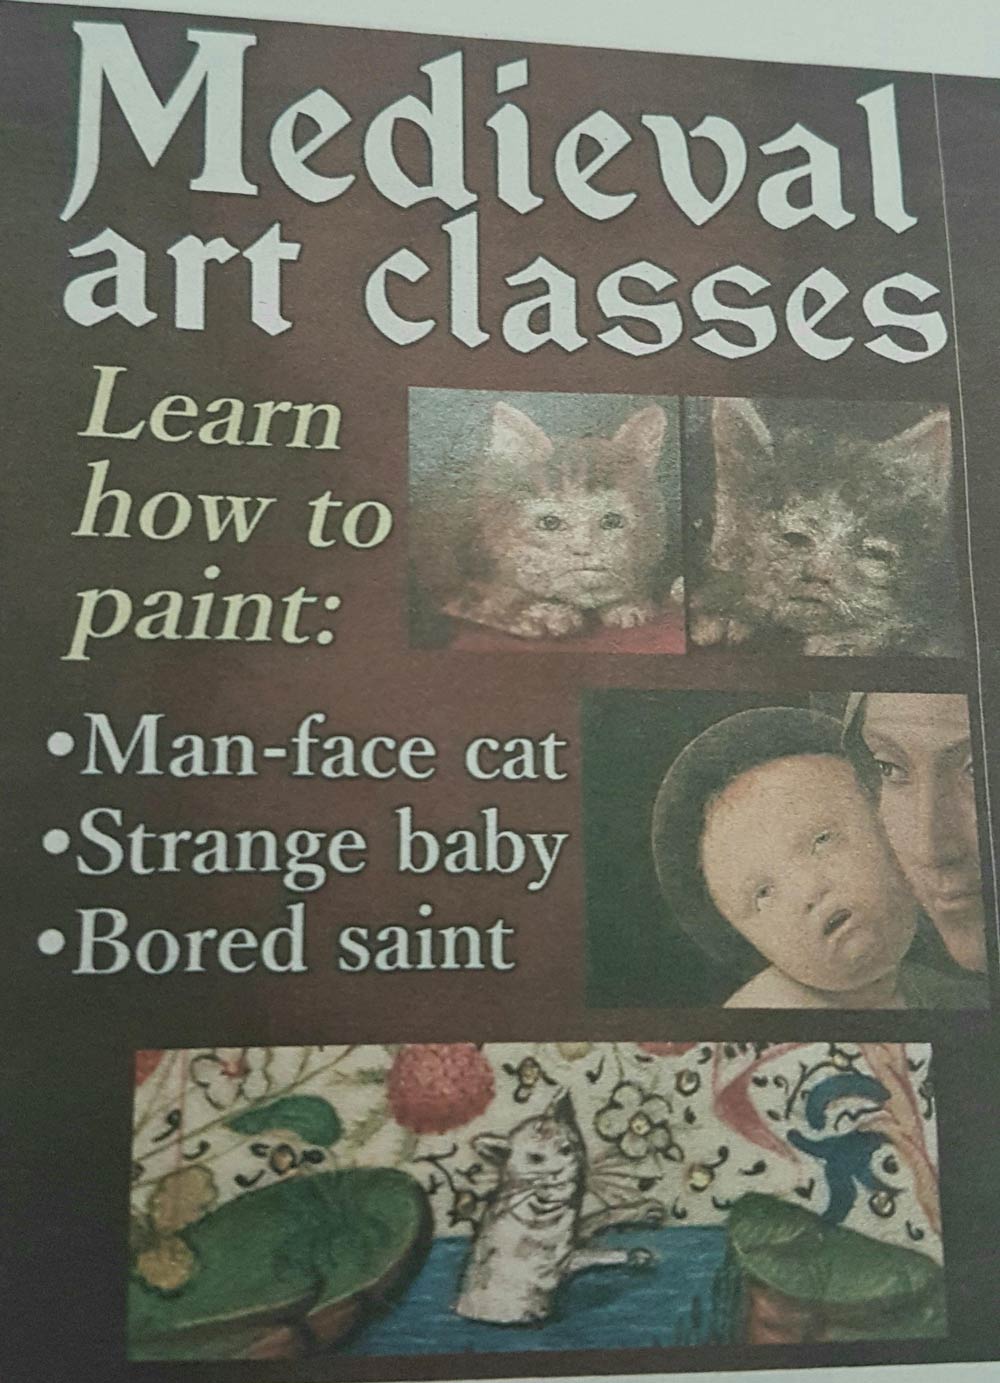 Found this ad in my local newspaper